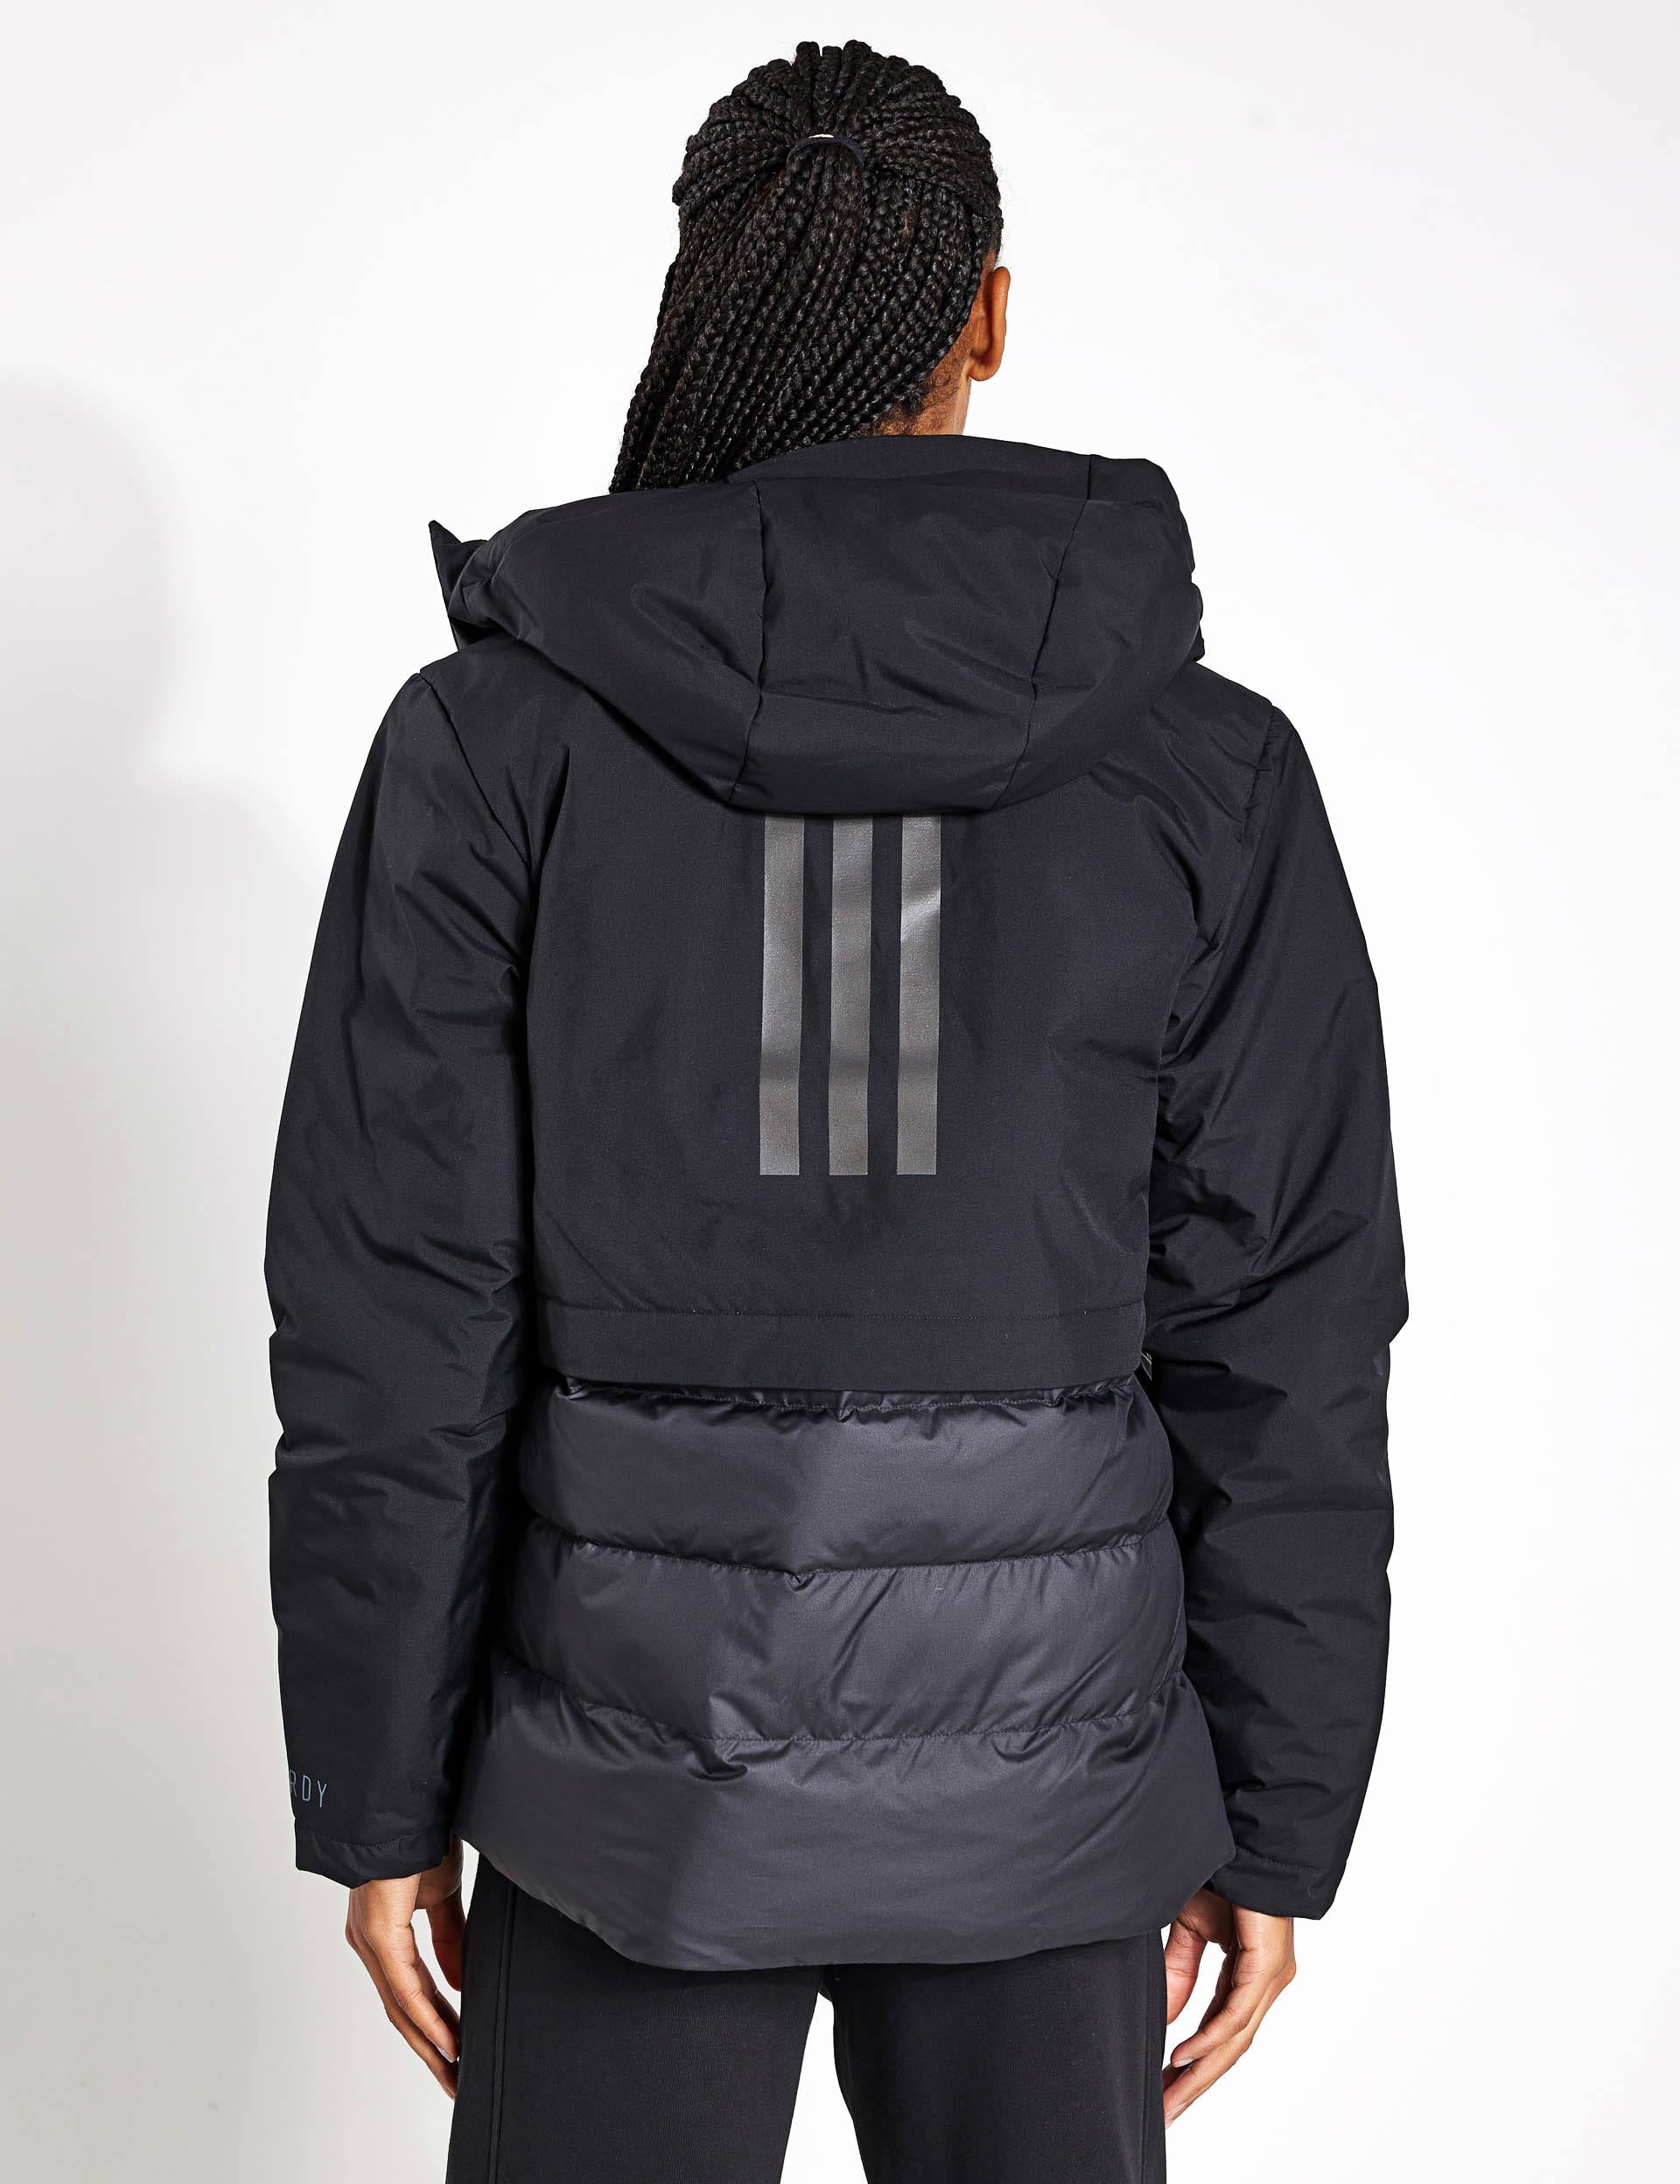 The | Traveer Jacket Sports | adidas - COLD.RDY Black Edit